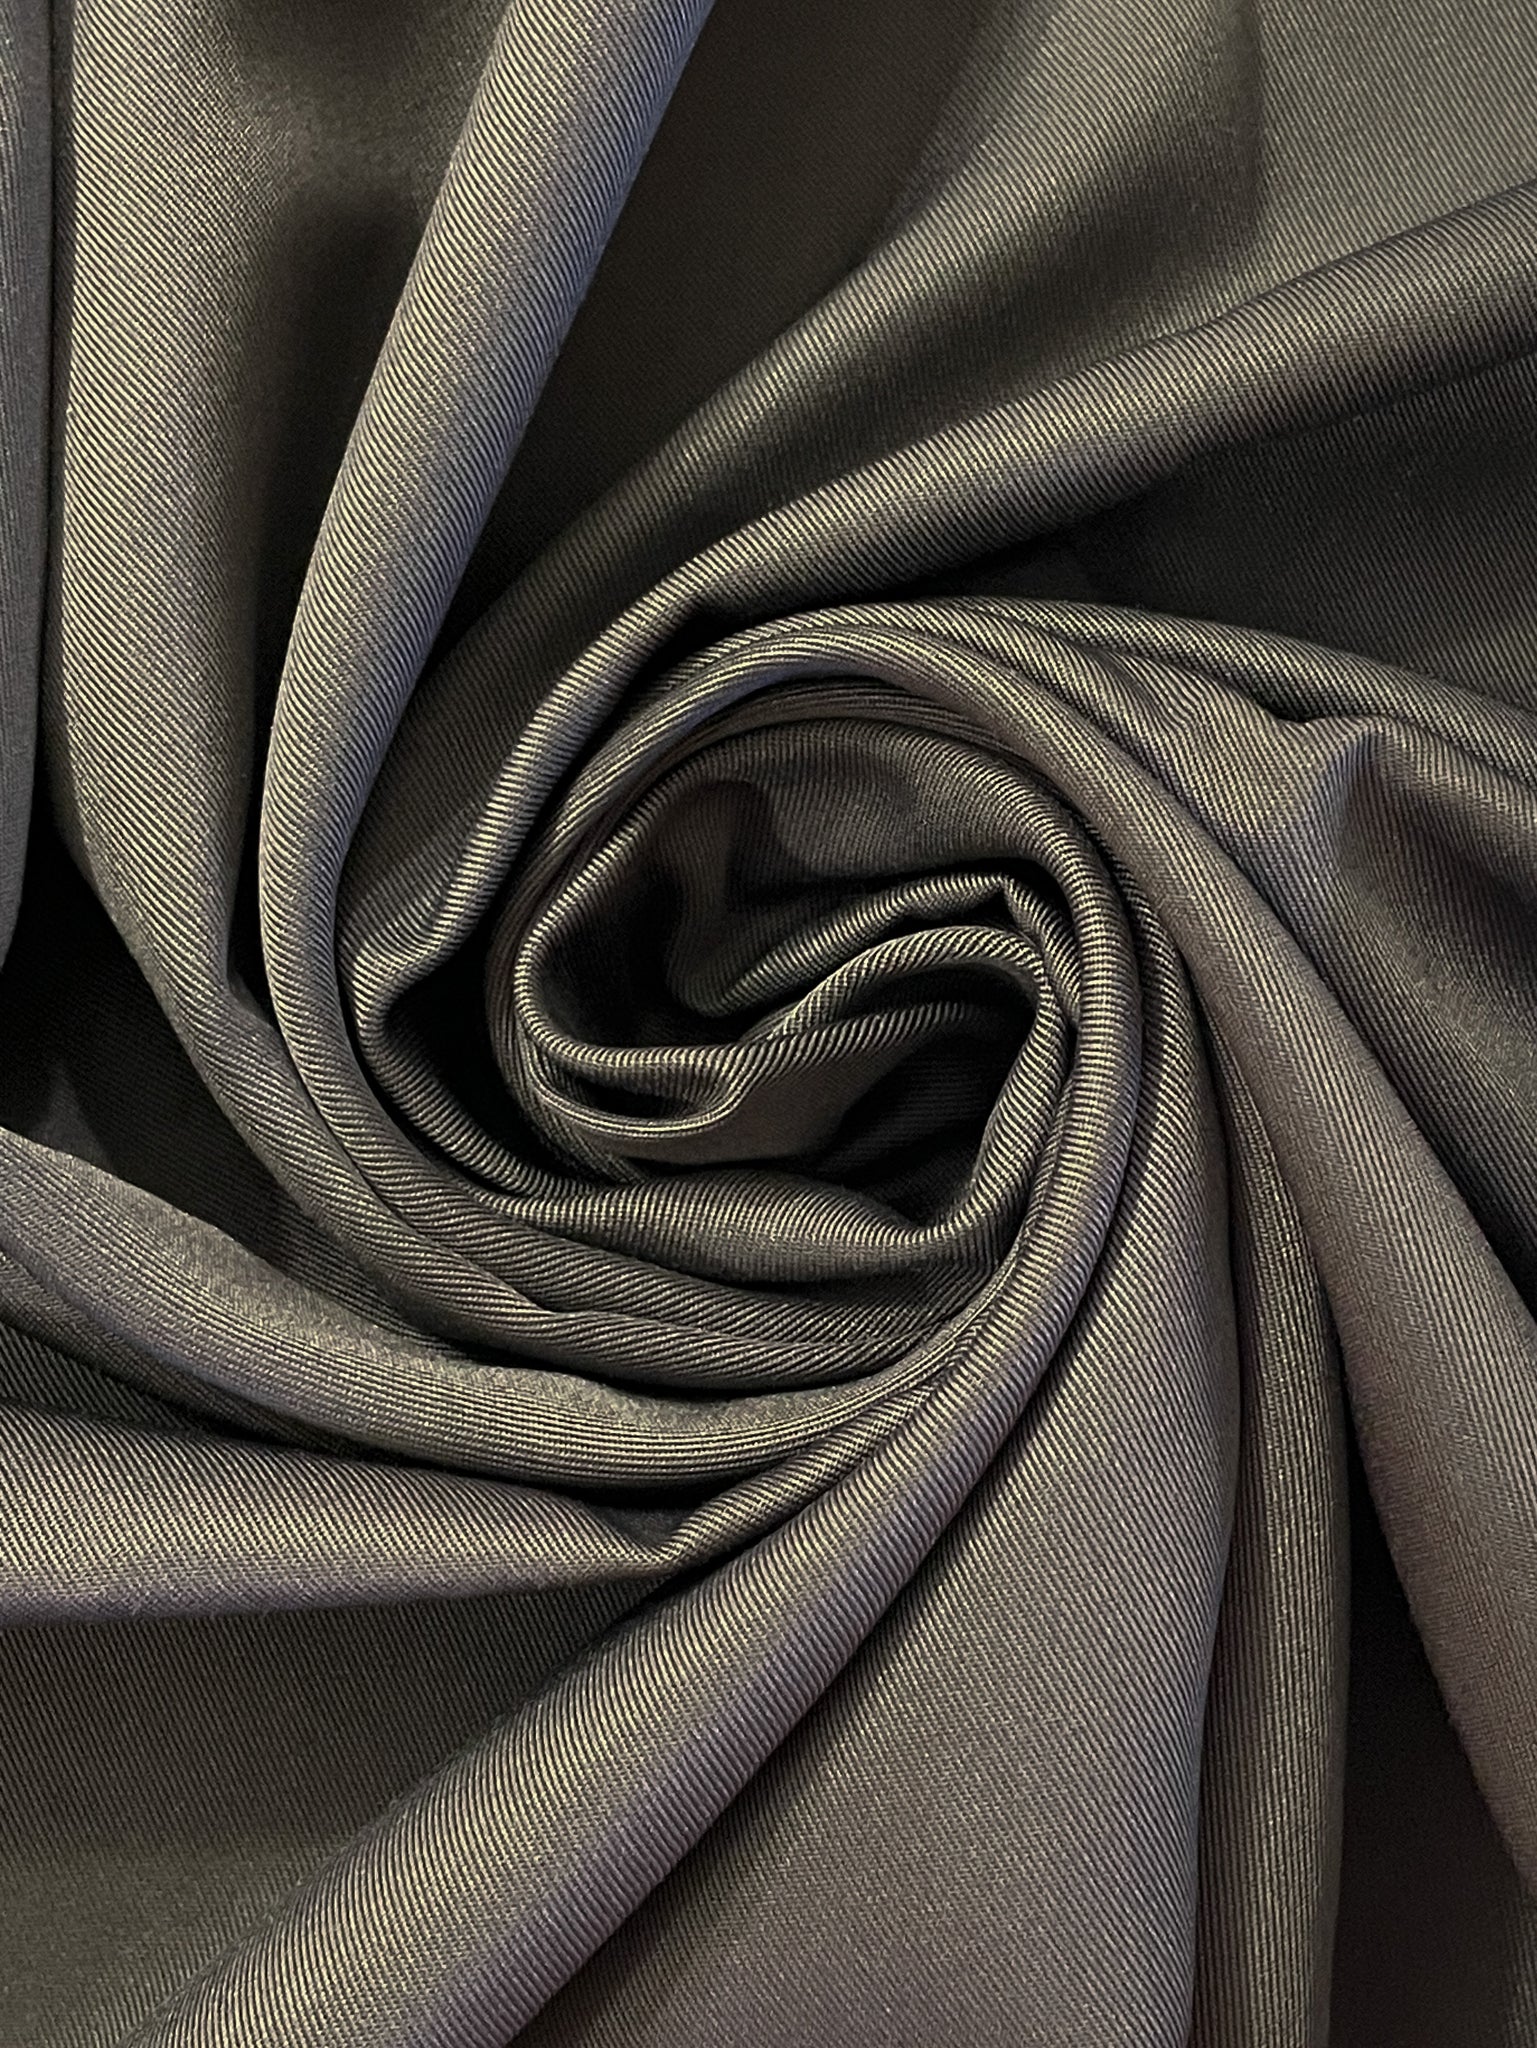 SALE 3/4 YD Polyester Twill Remnant - Black and Charcoal